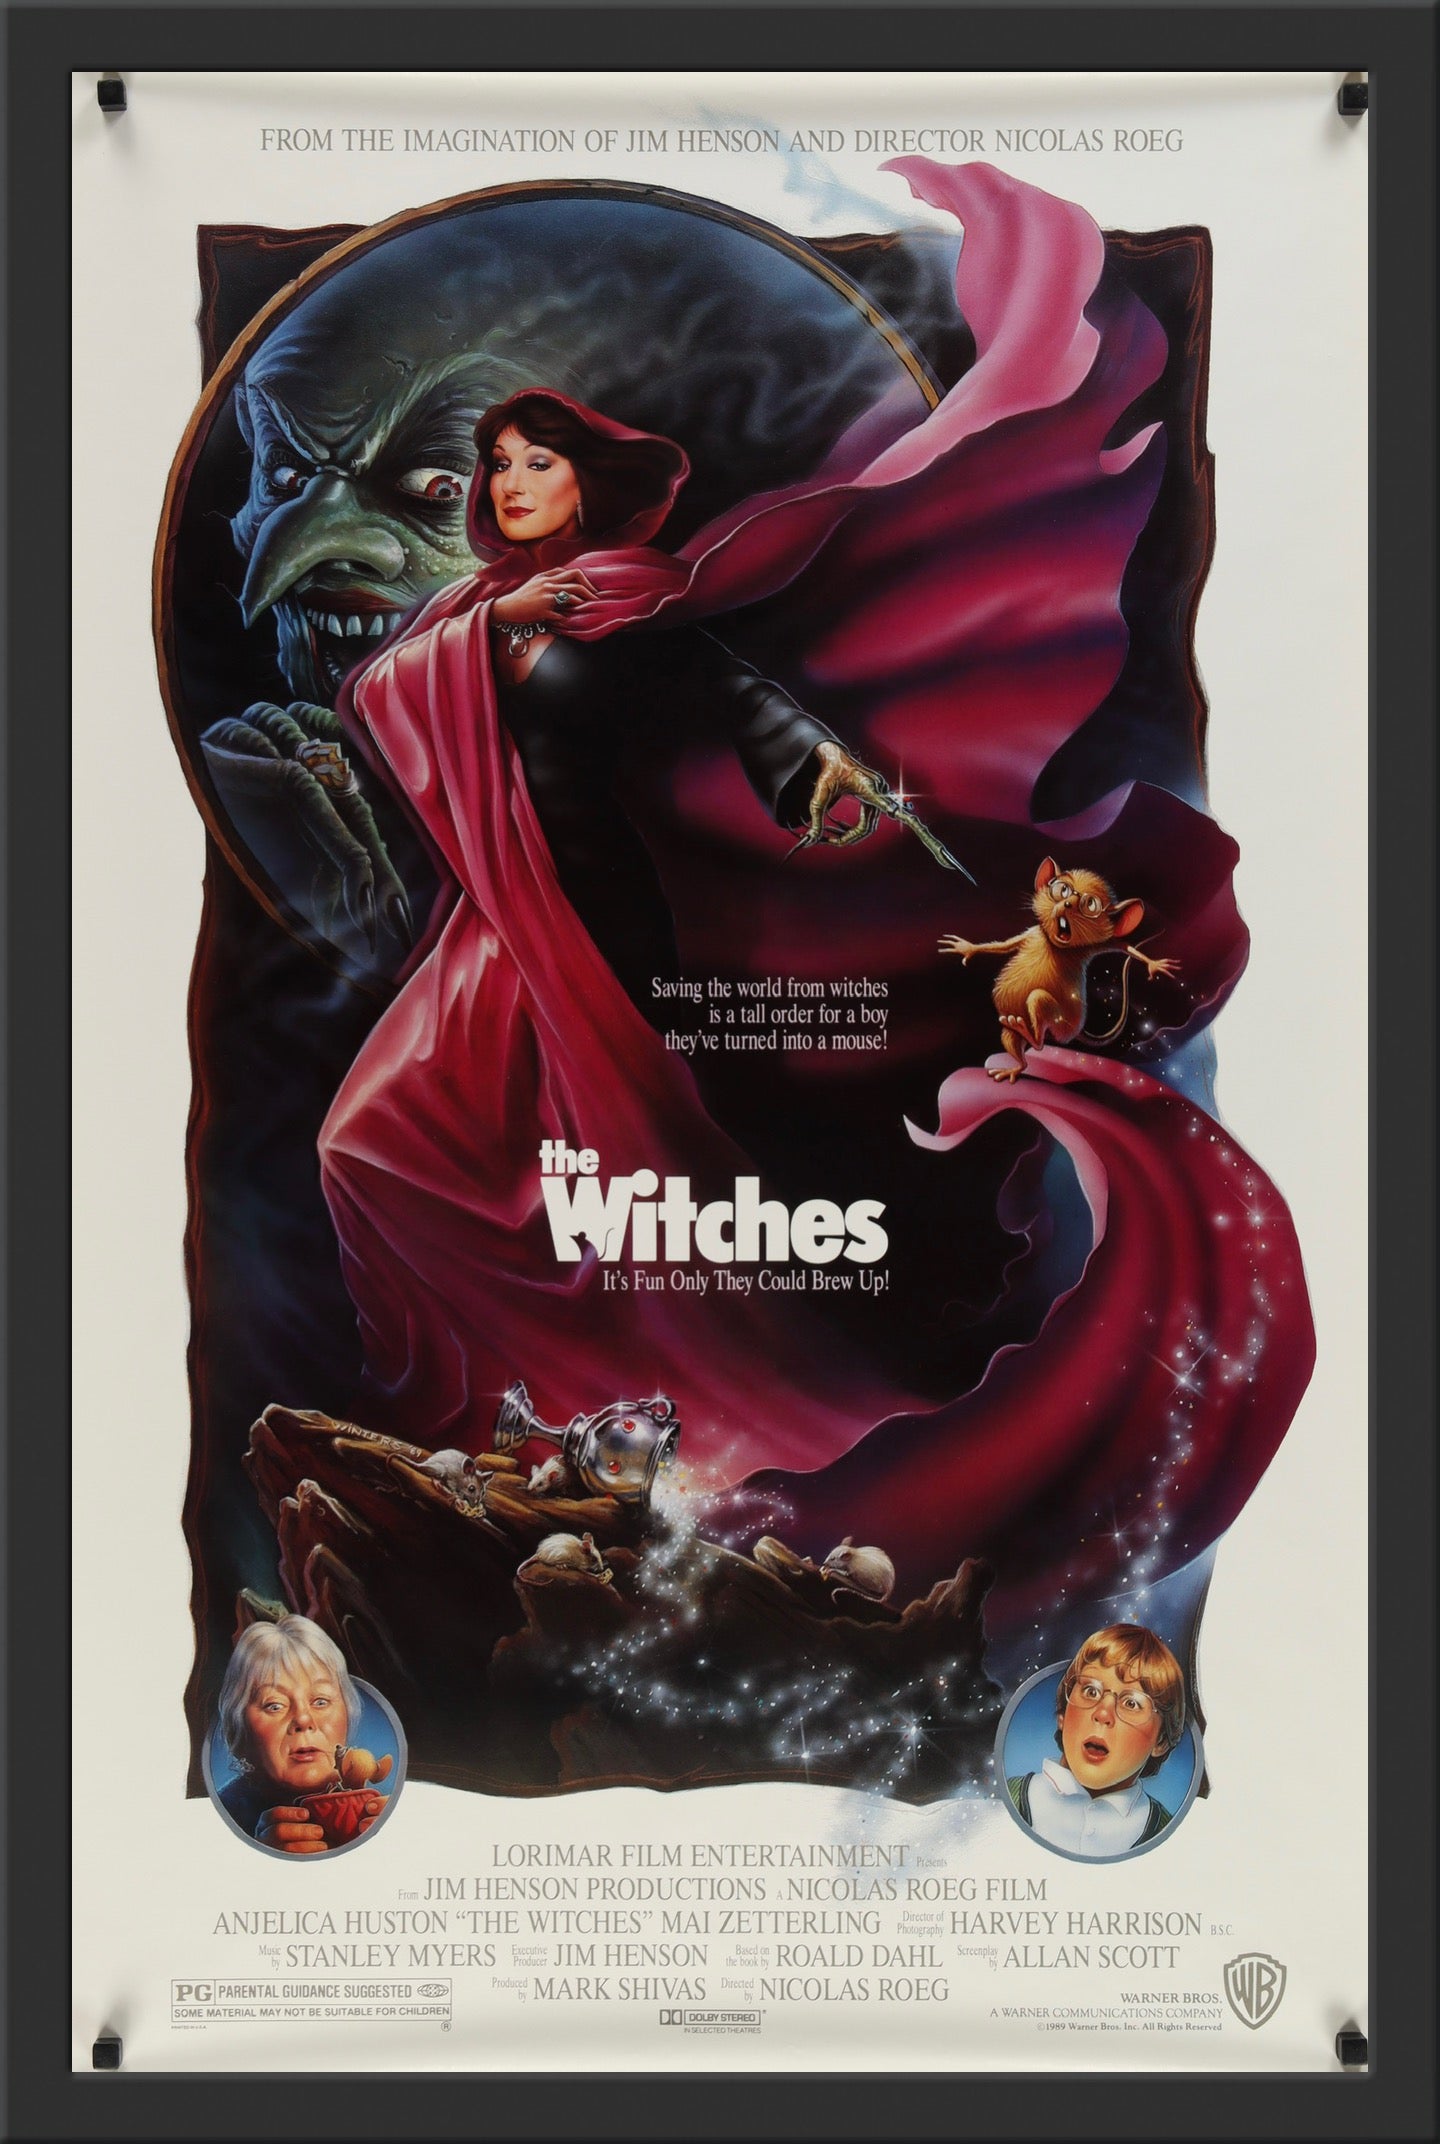 An original movie poster for the Jim Henson film The Witches